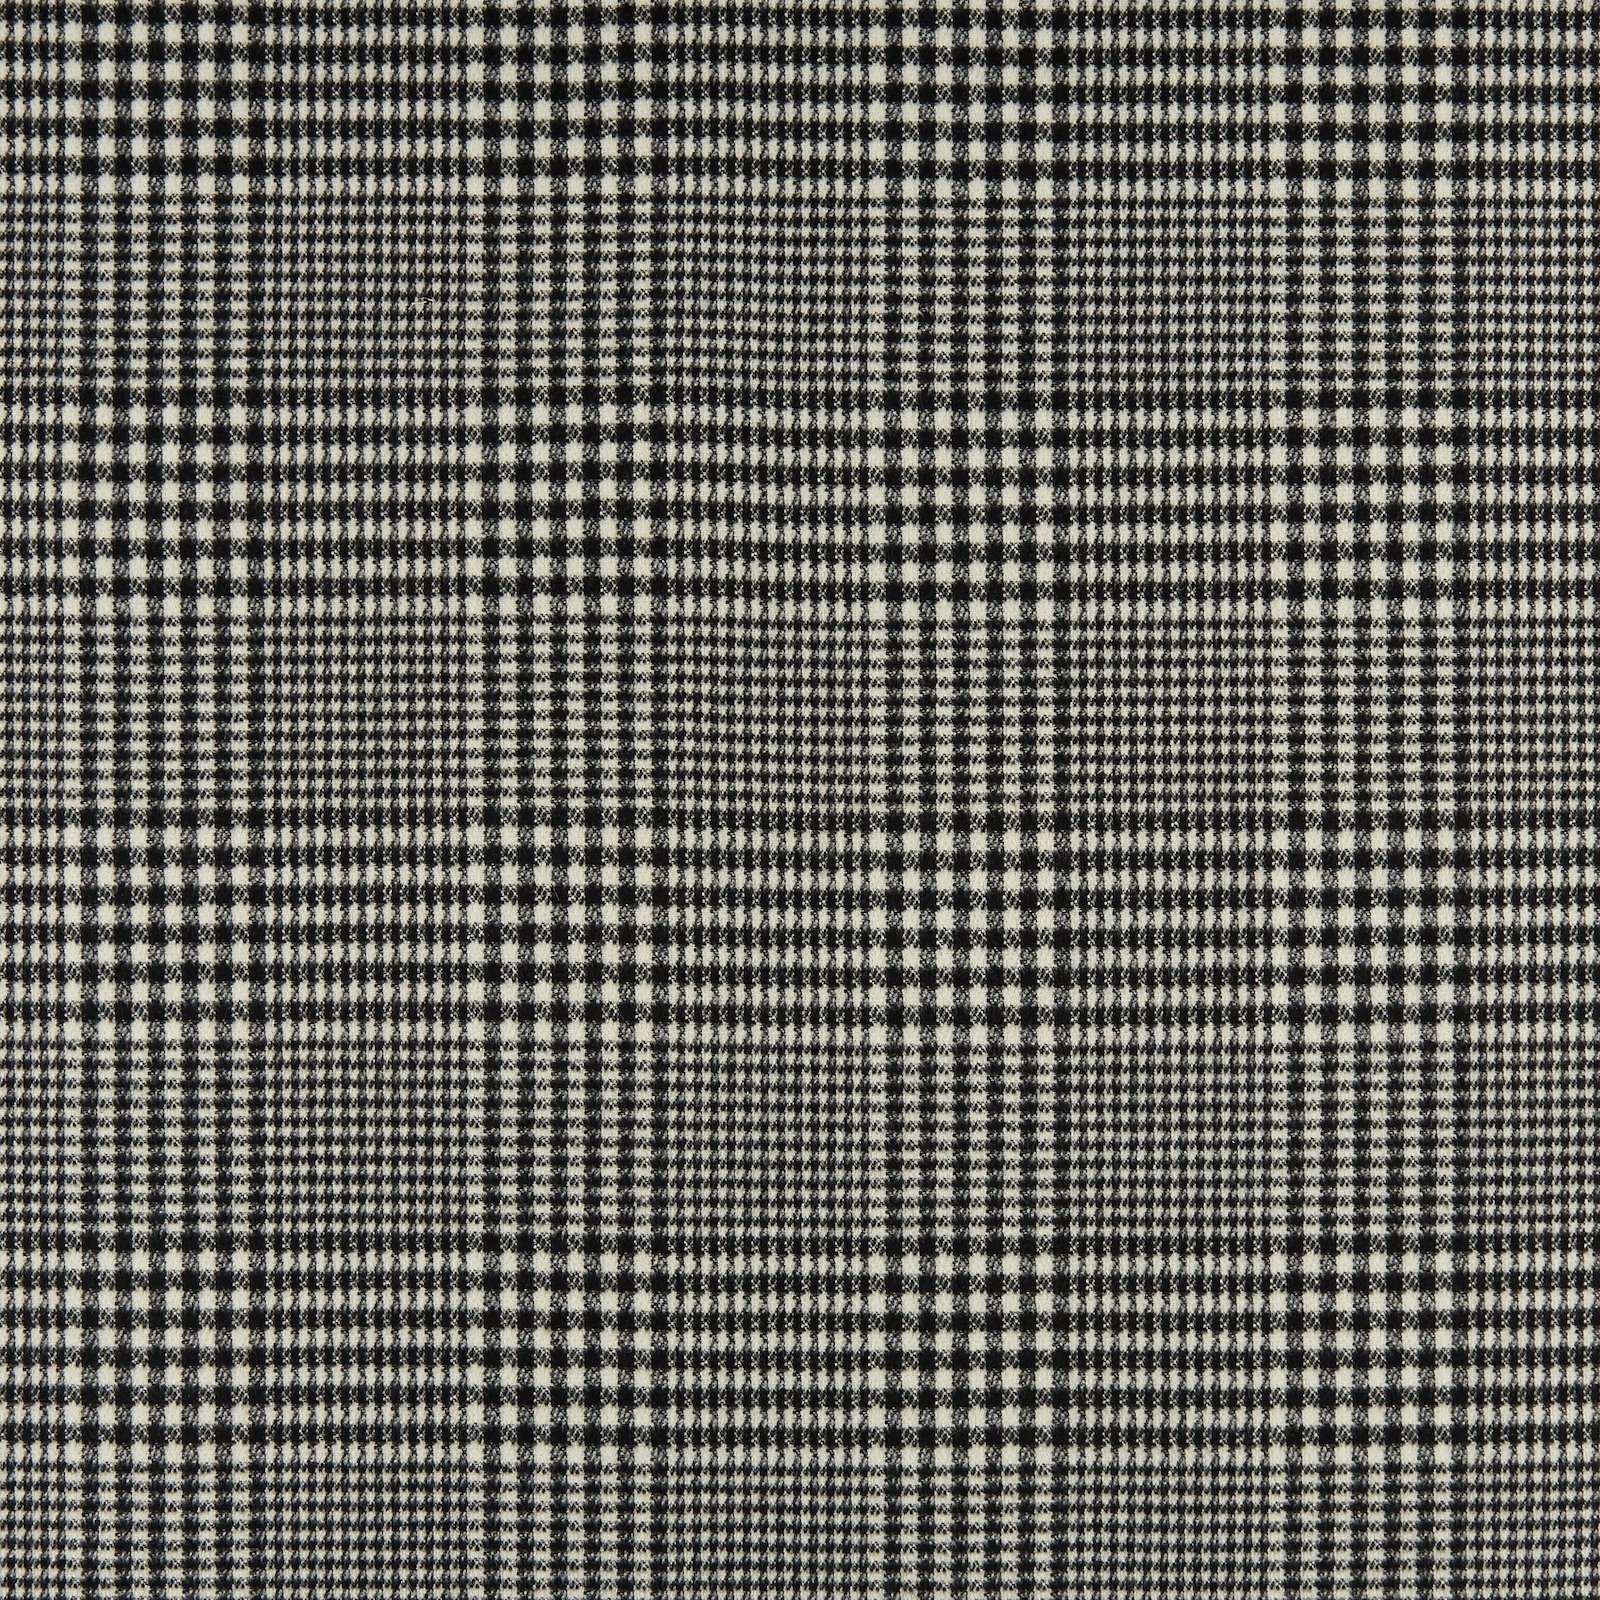 Woven wool black/white check 300236_pack_sp